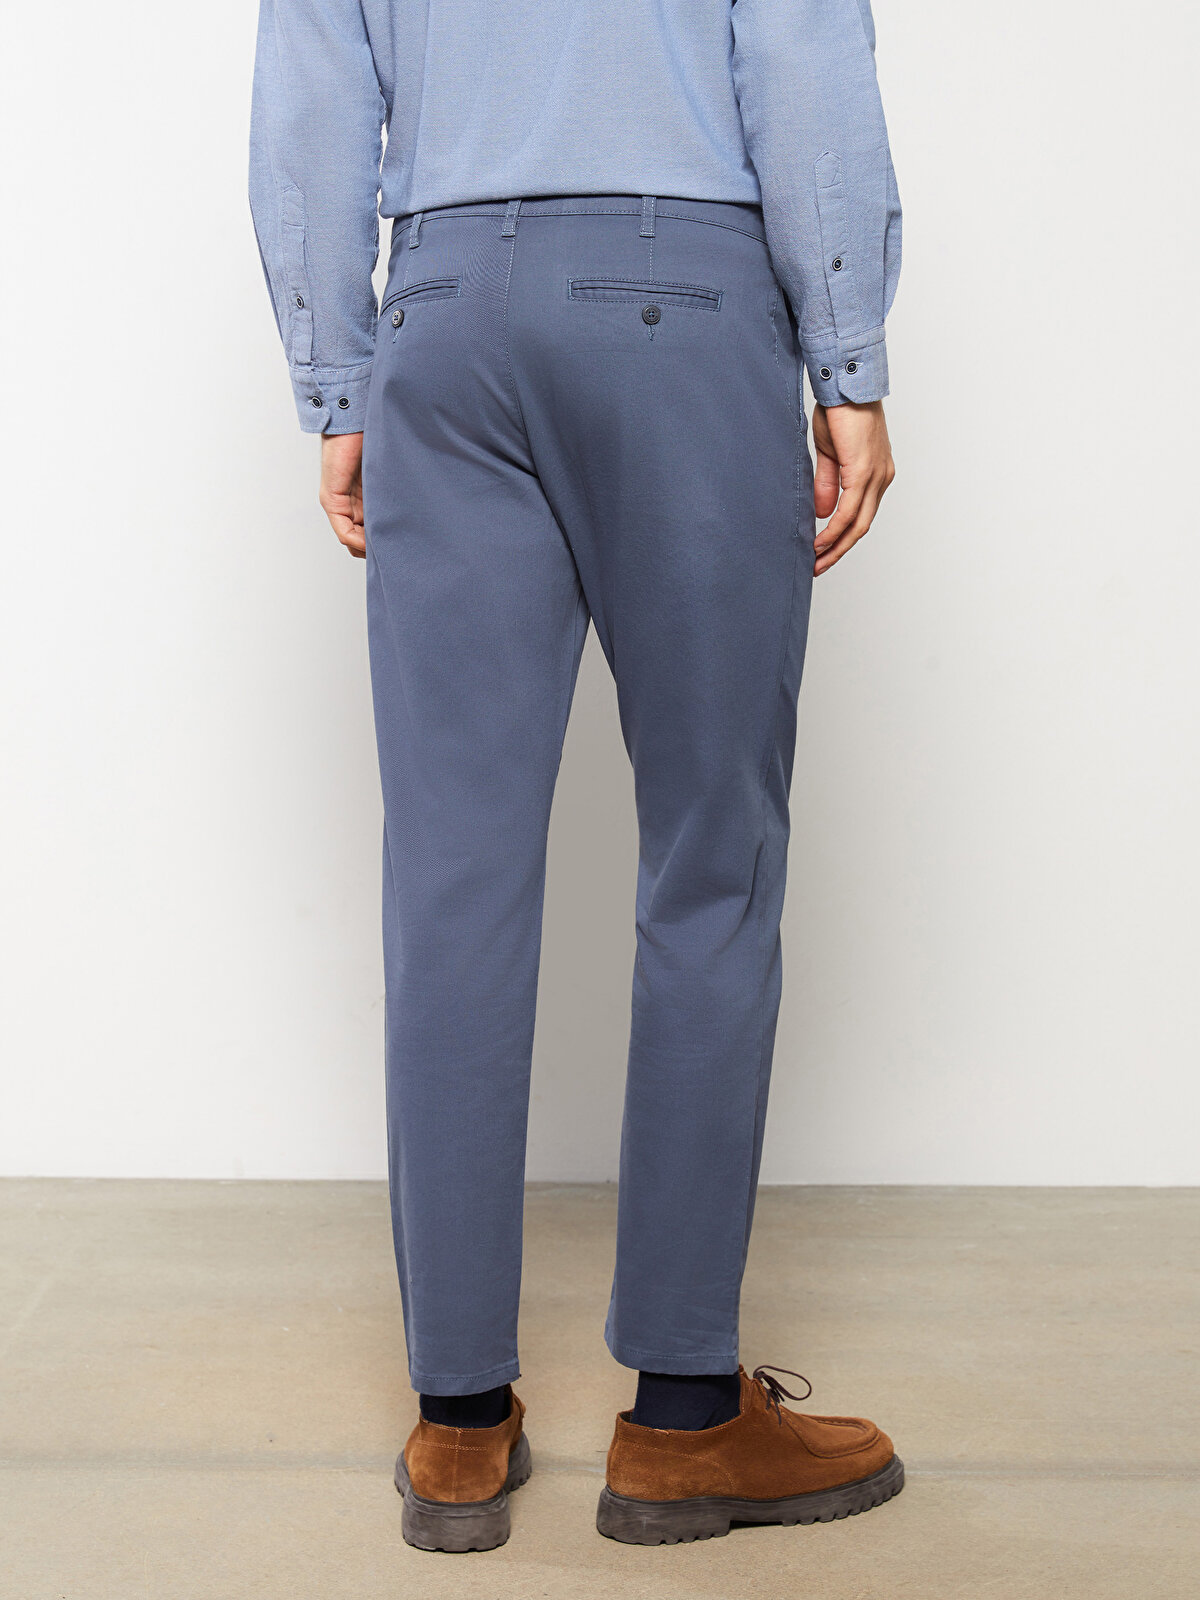 Buy The Indian Garage Co Men Blue Slim Fit Chinos - Trousers for Men  16515134 | Myntra